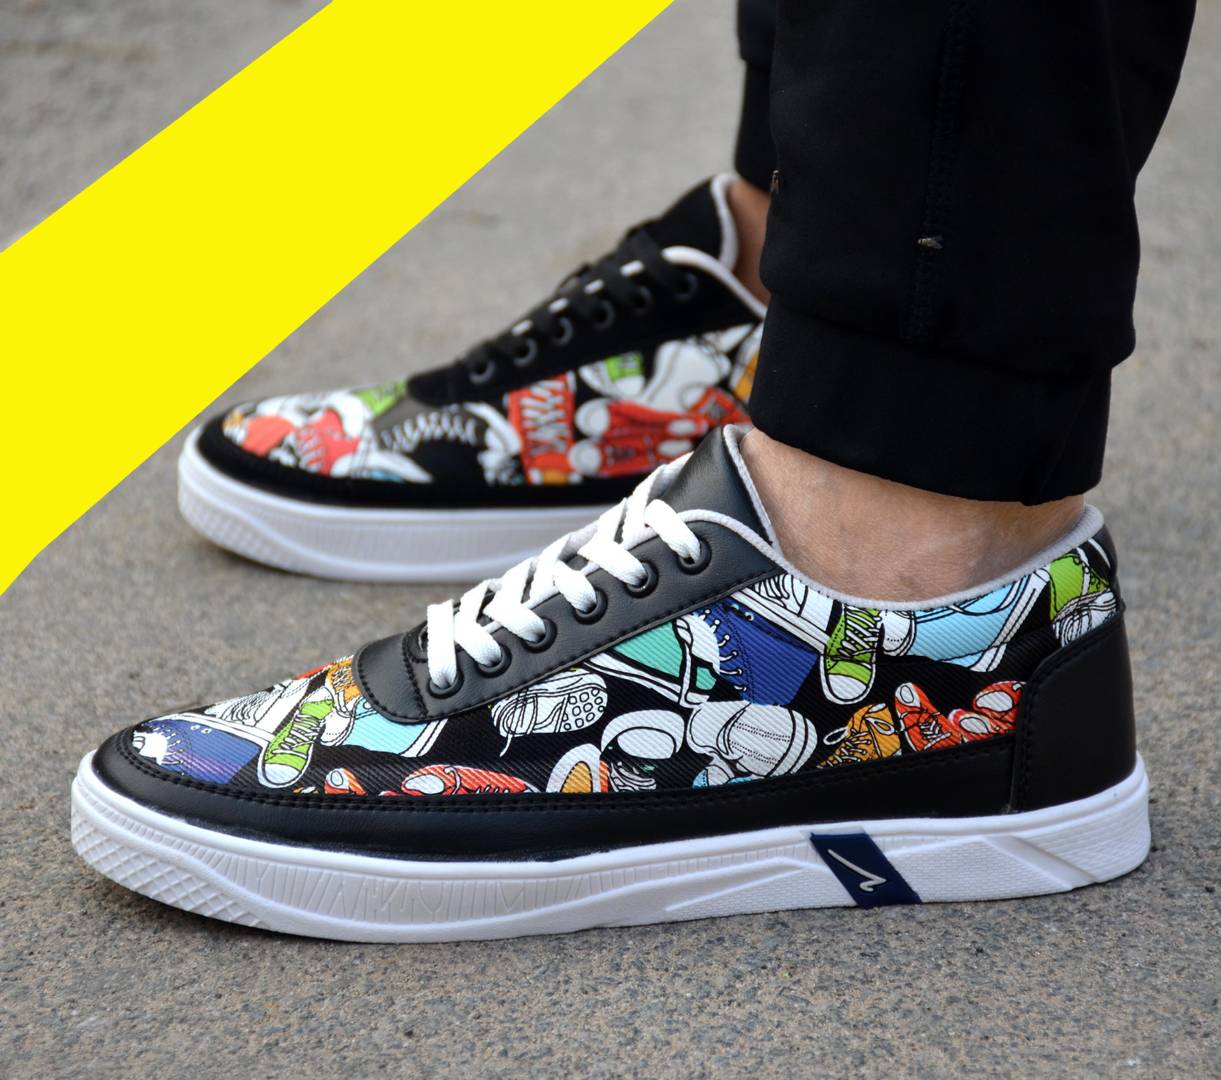 Men's Stylish Multicoloured Printed Casual Sneakers